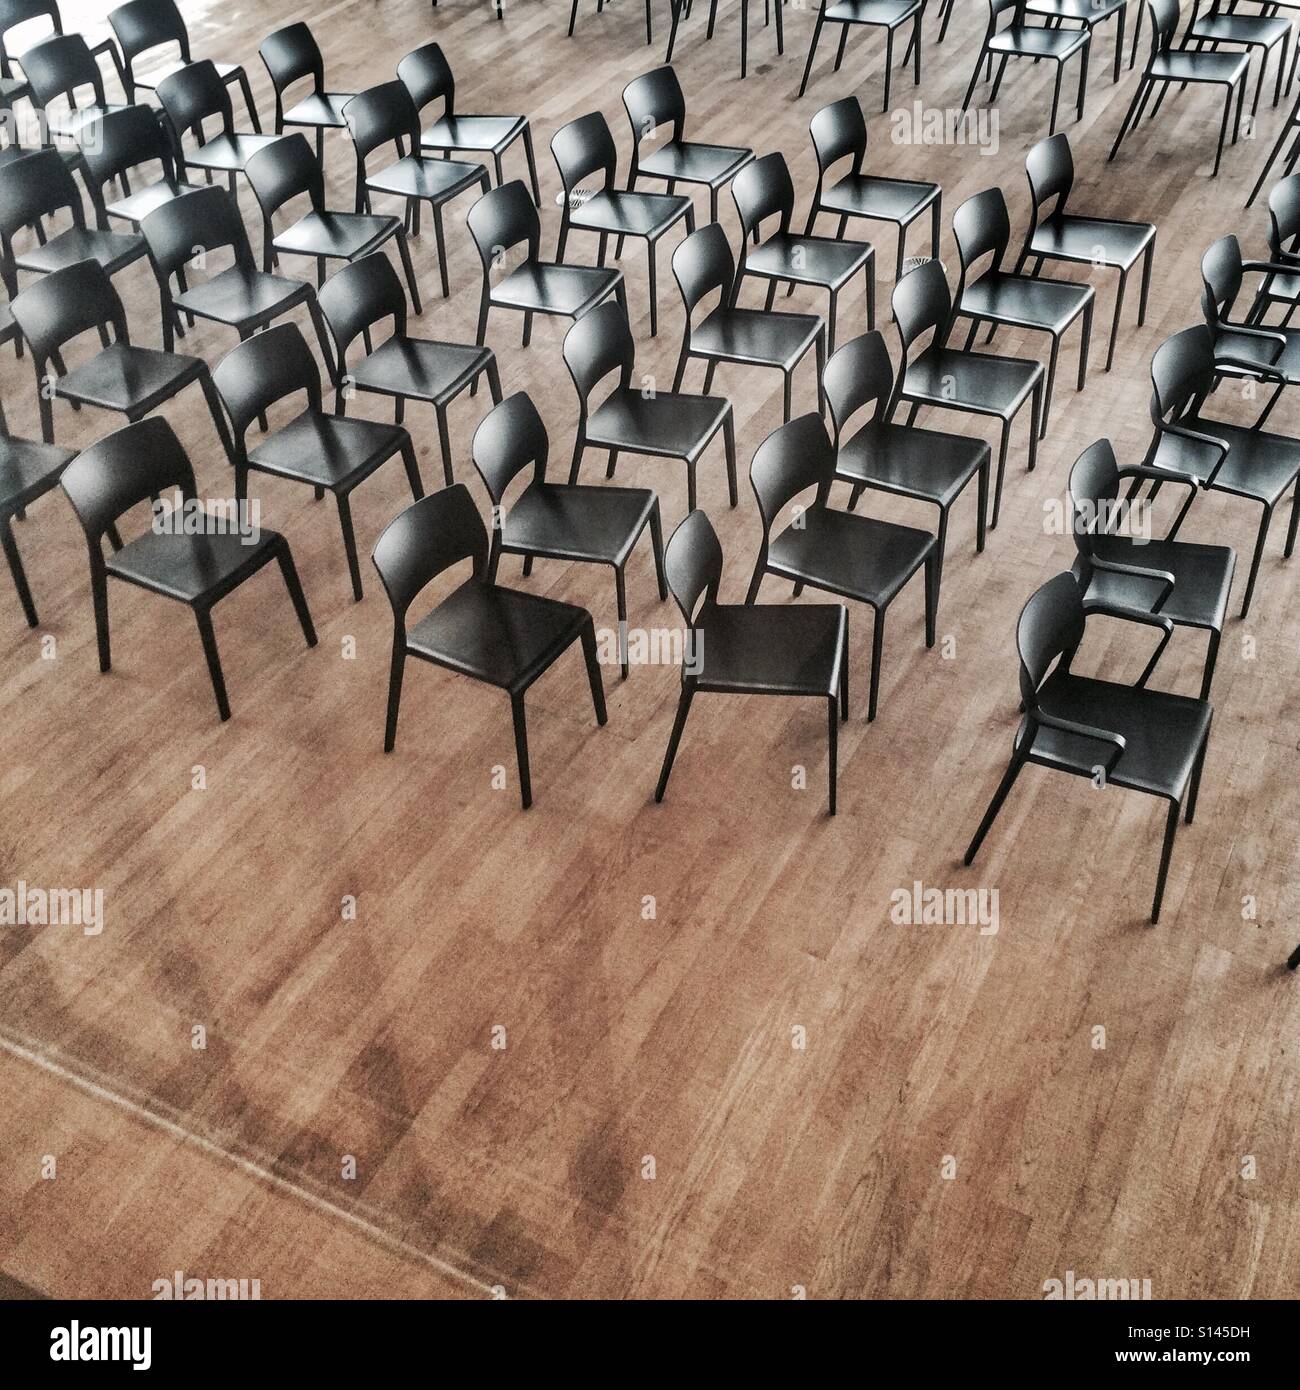 Rows of black chairs Stock Photo